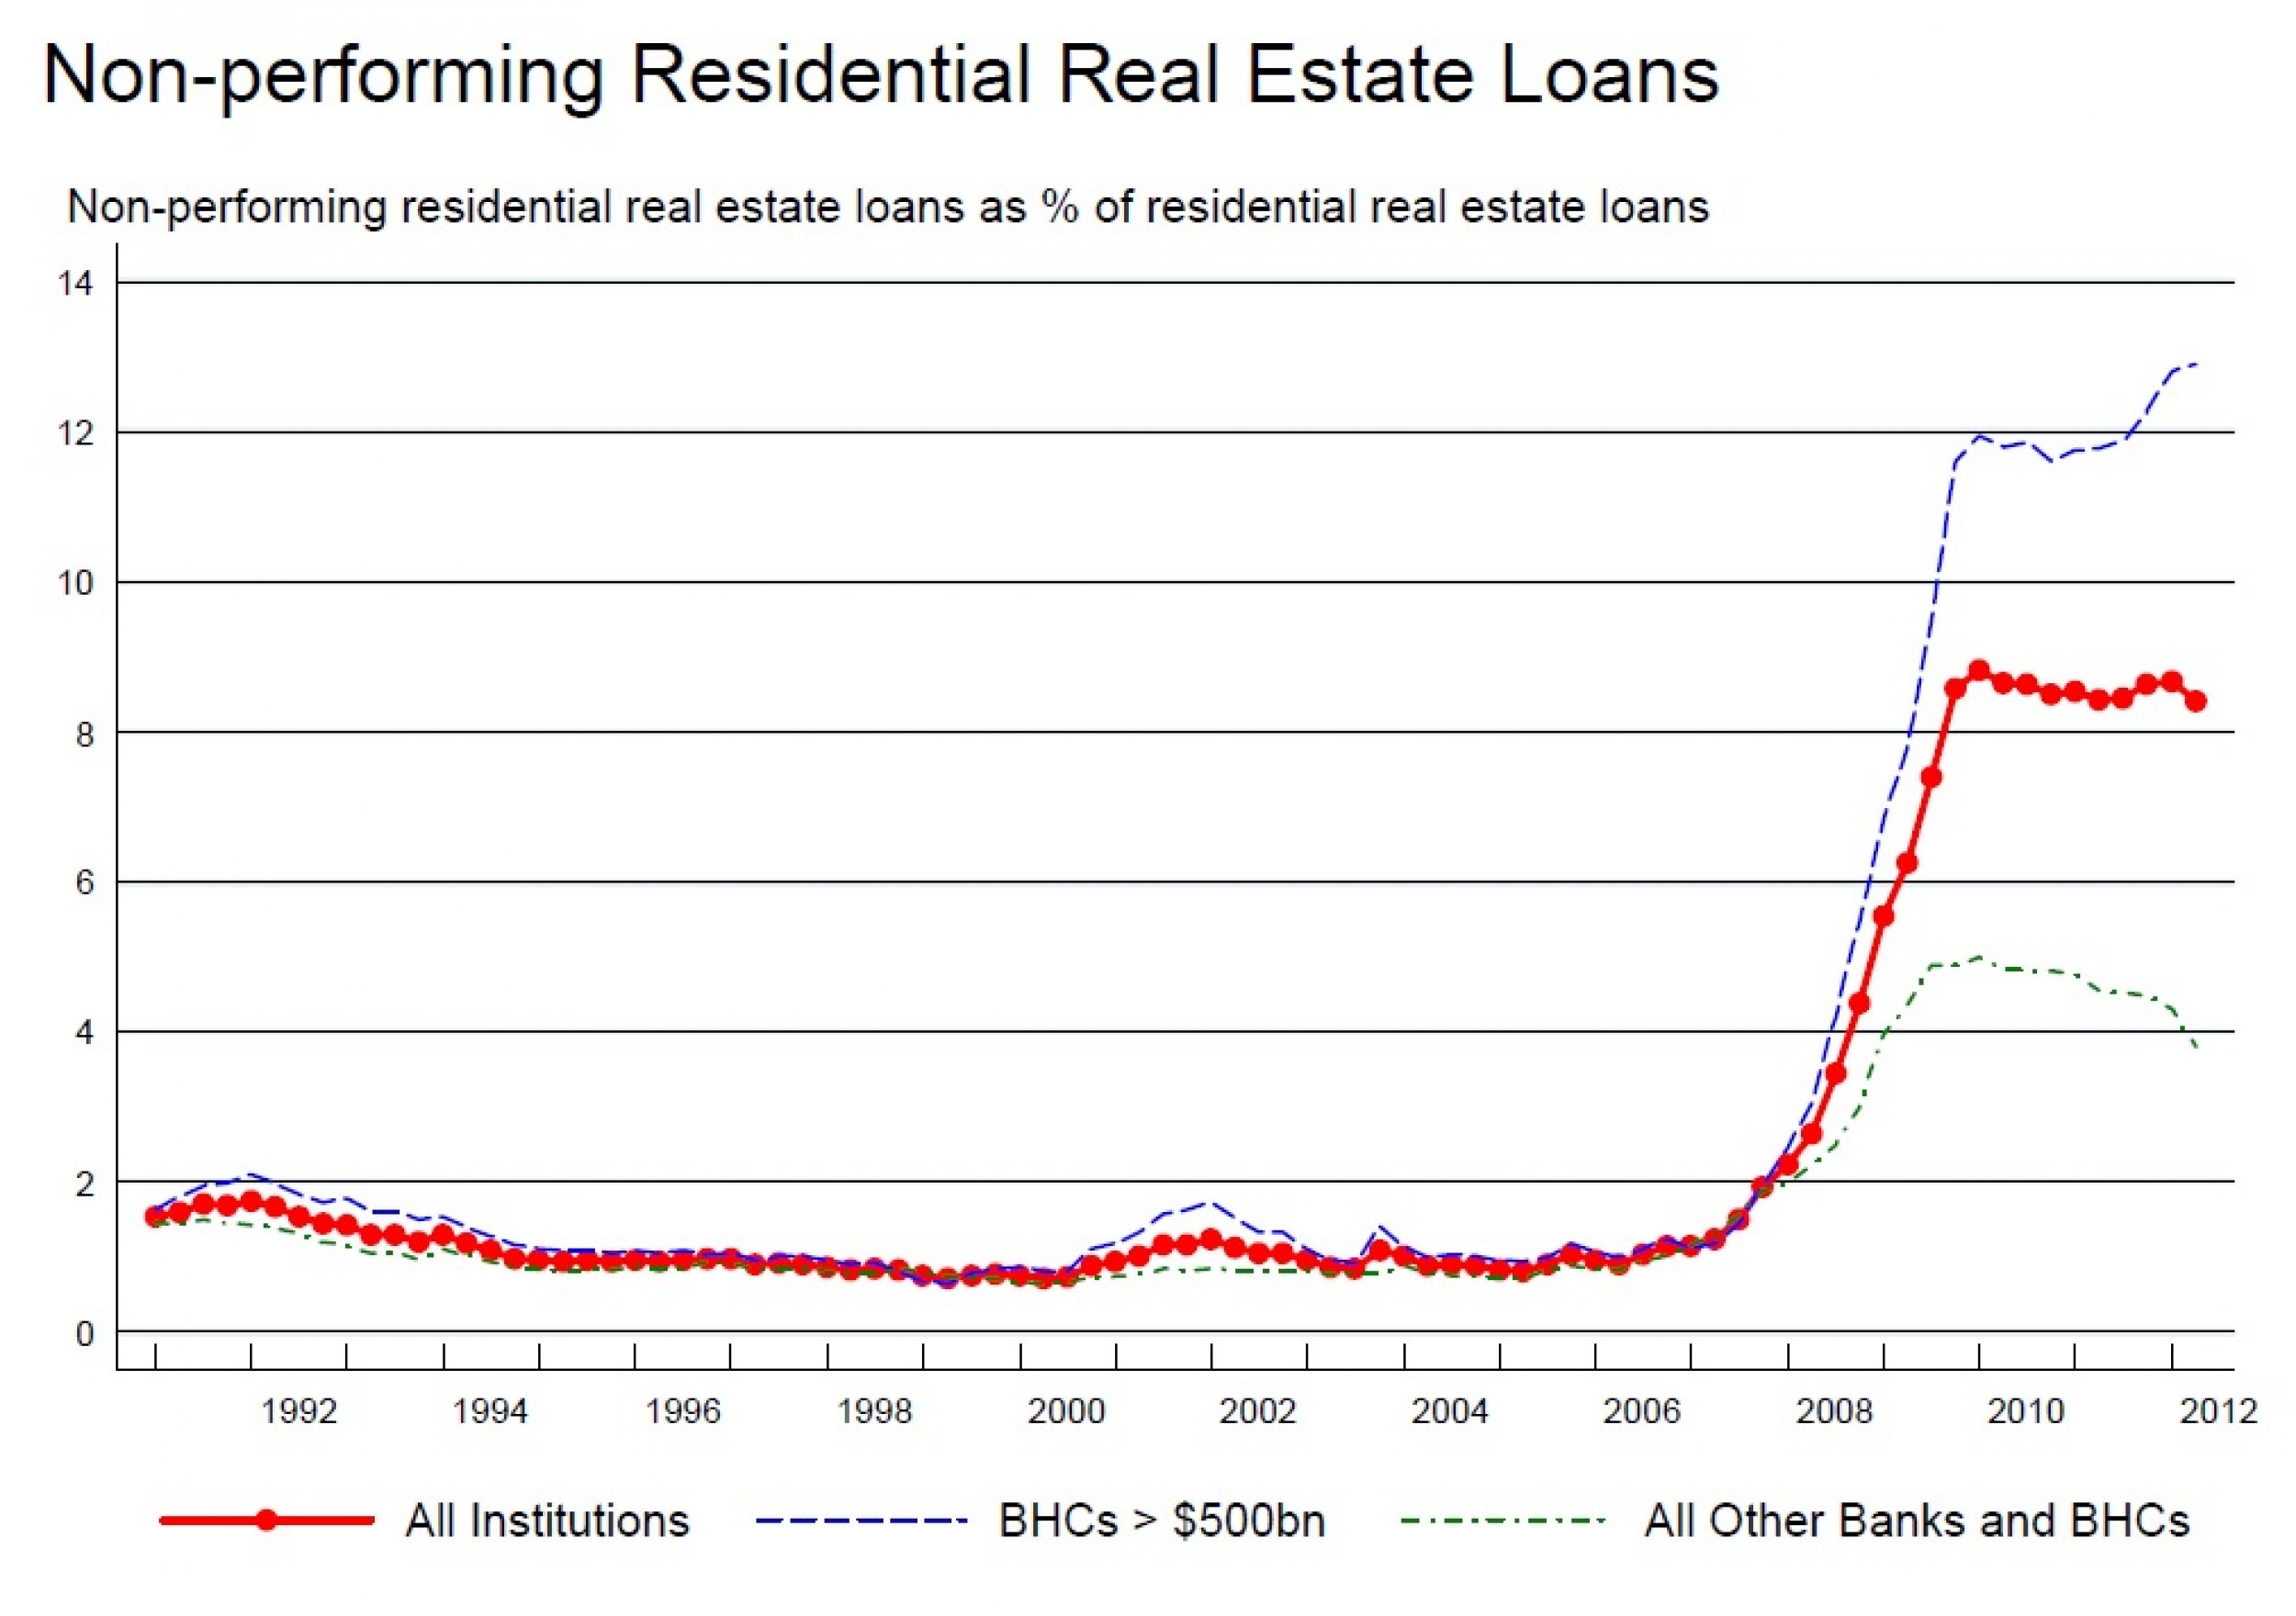 And the divergence in the residential real estate loan market is uncanny.